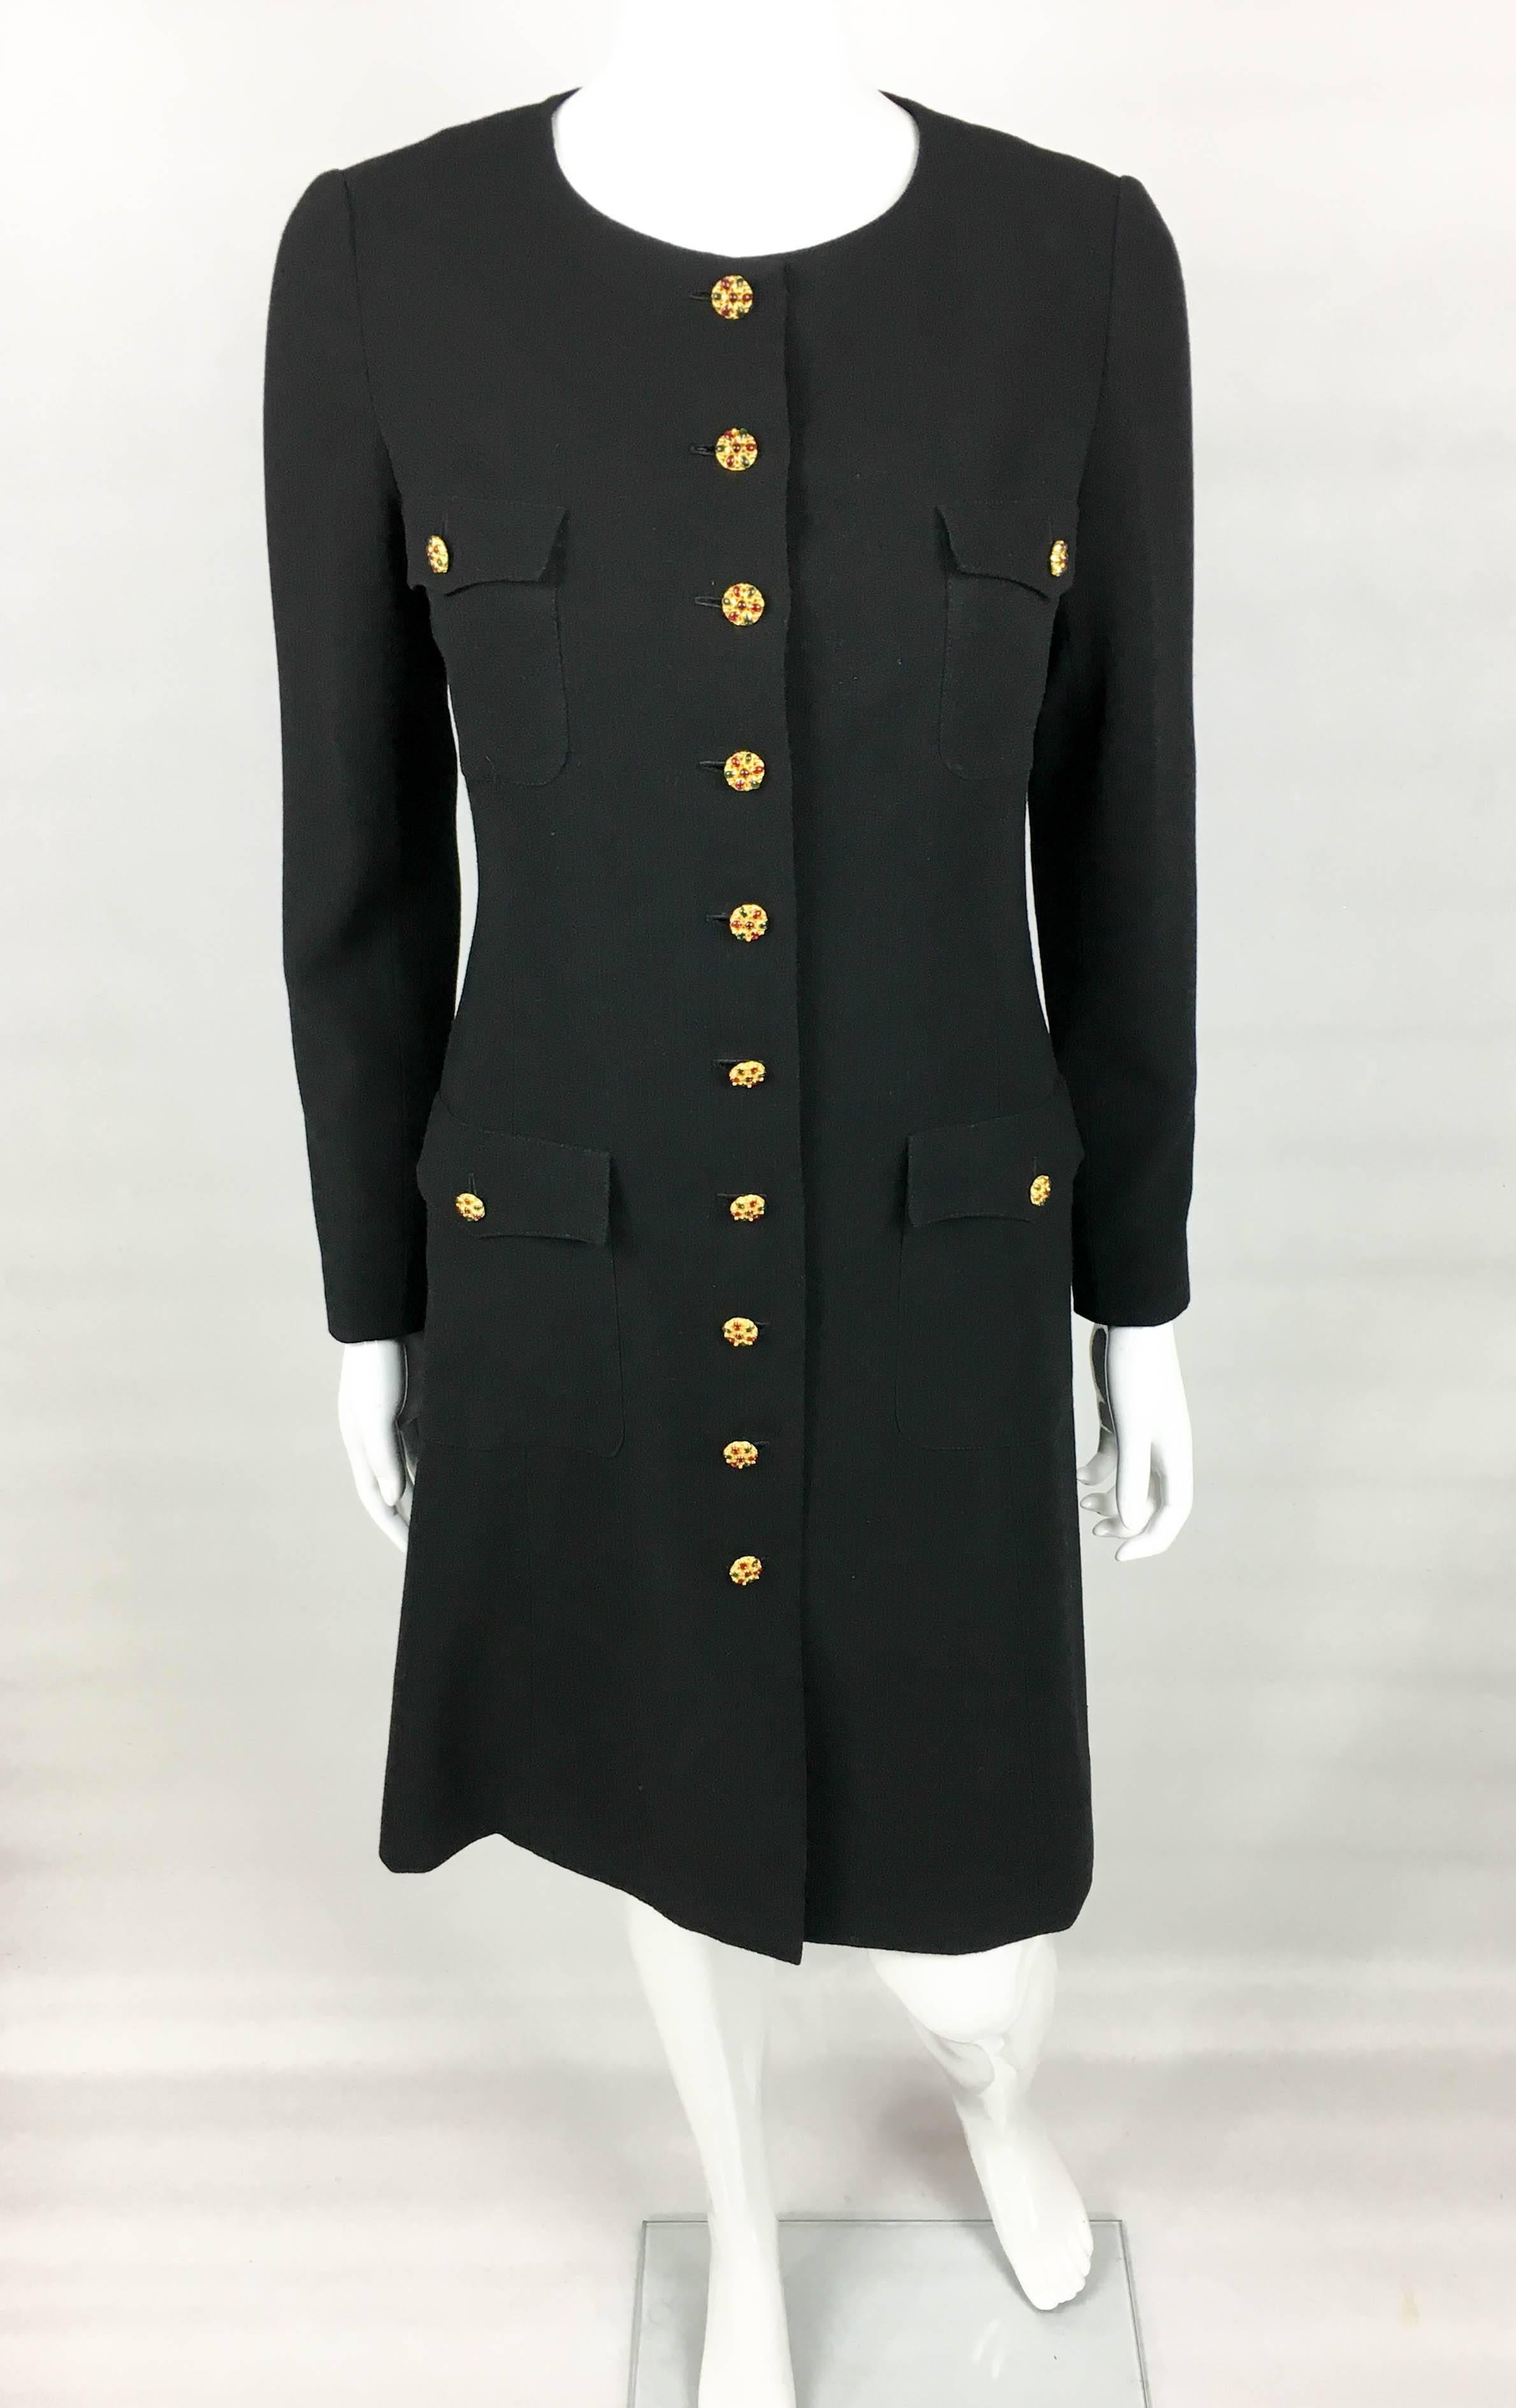 Women's 1996 Chanel Runway Look Black Wool Coat / Dress With Baroque-Style Buttons